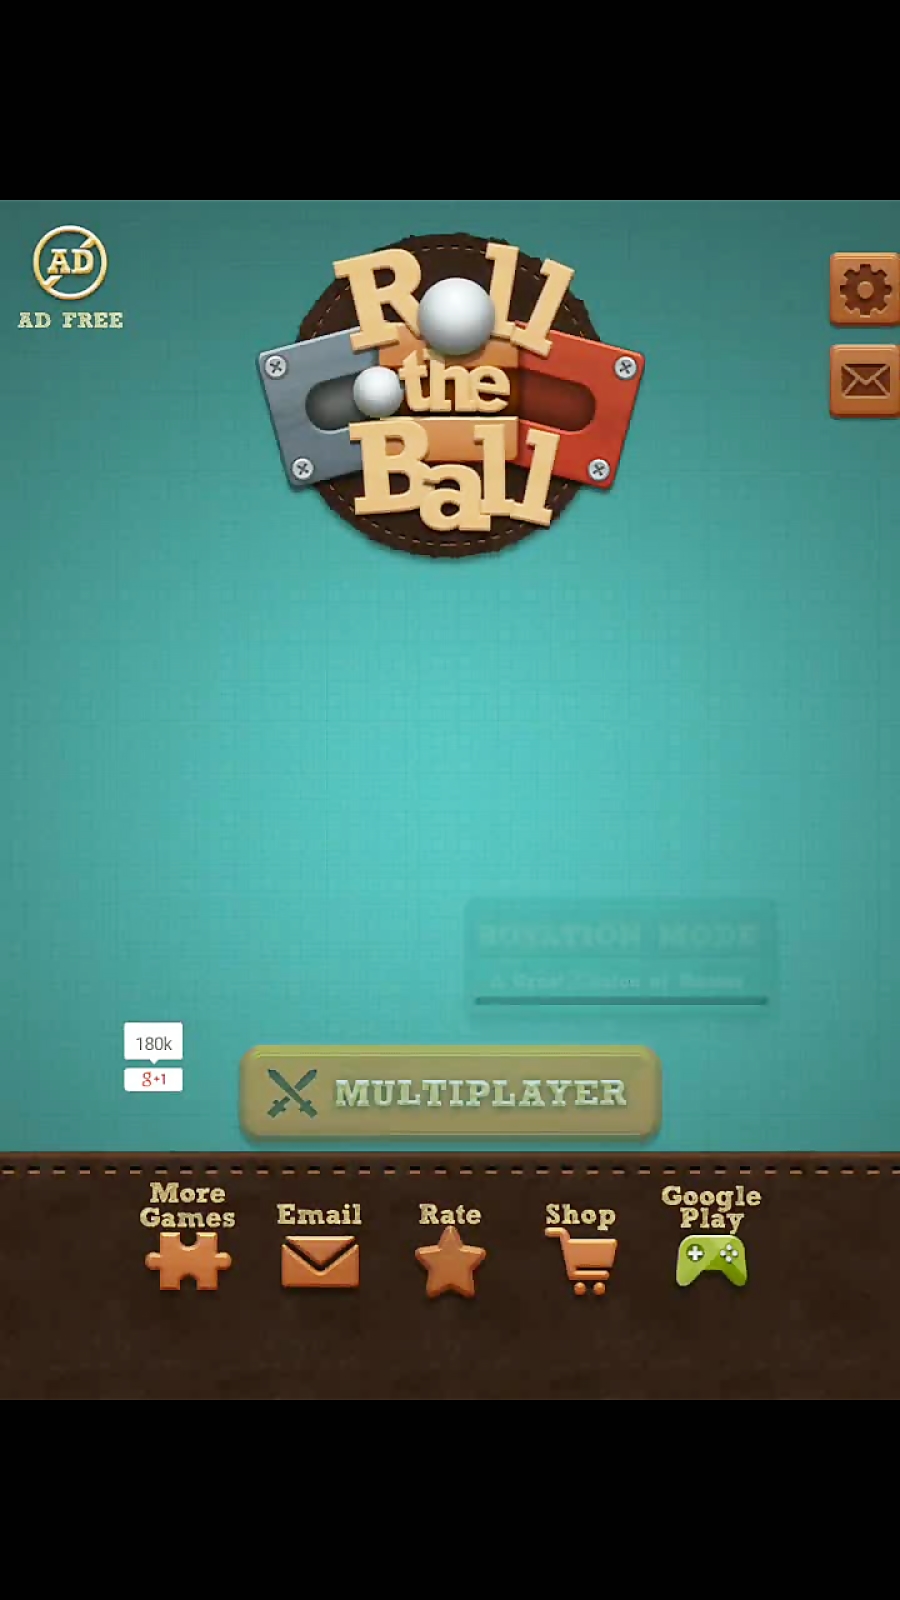 Roll The Ball Gameplay